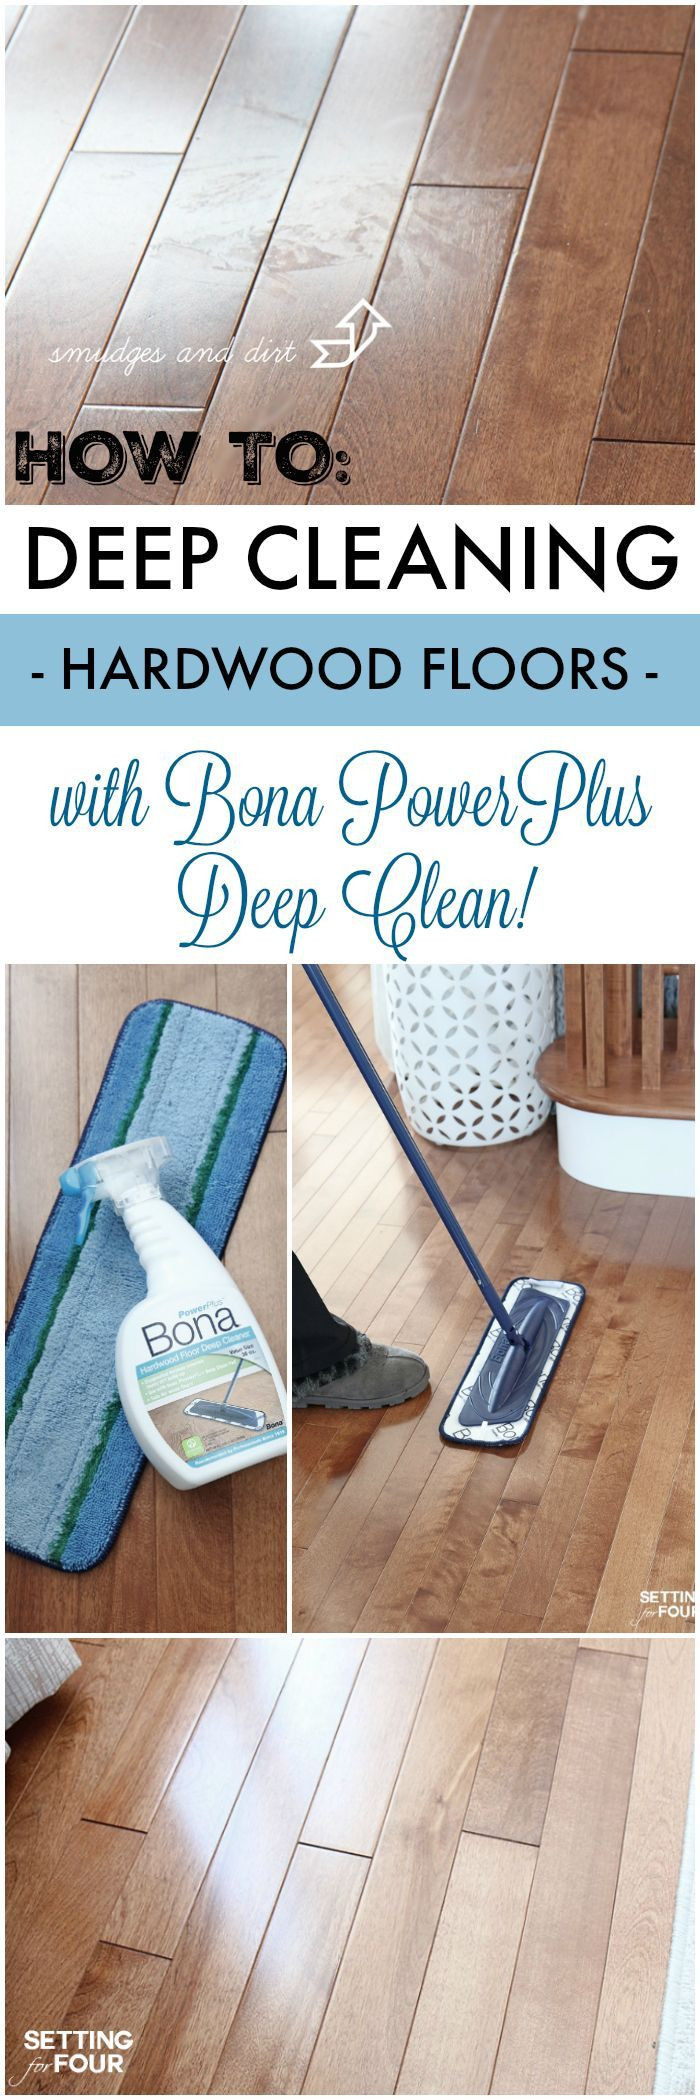 how to use bona hardwood floor mop of how to use bona tile cleaner lovely 50 luxury bona hardwood floor in how to use bona tile cleaner unique 17 best our most powerful clean yet images on